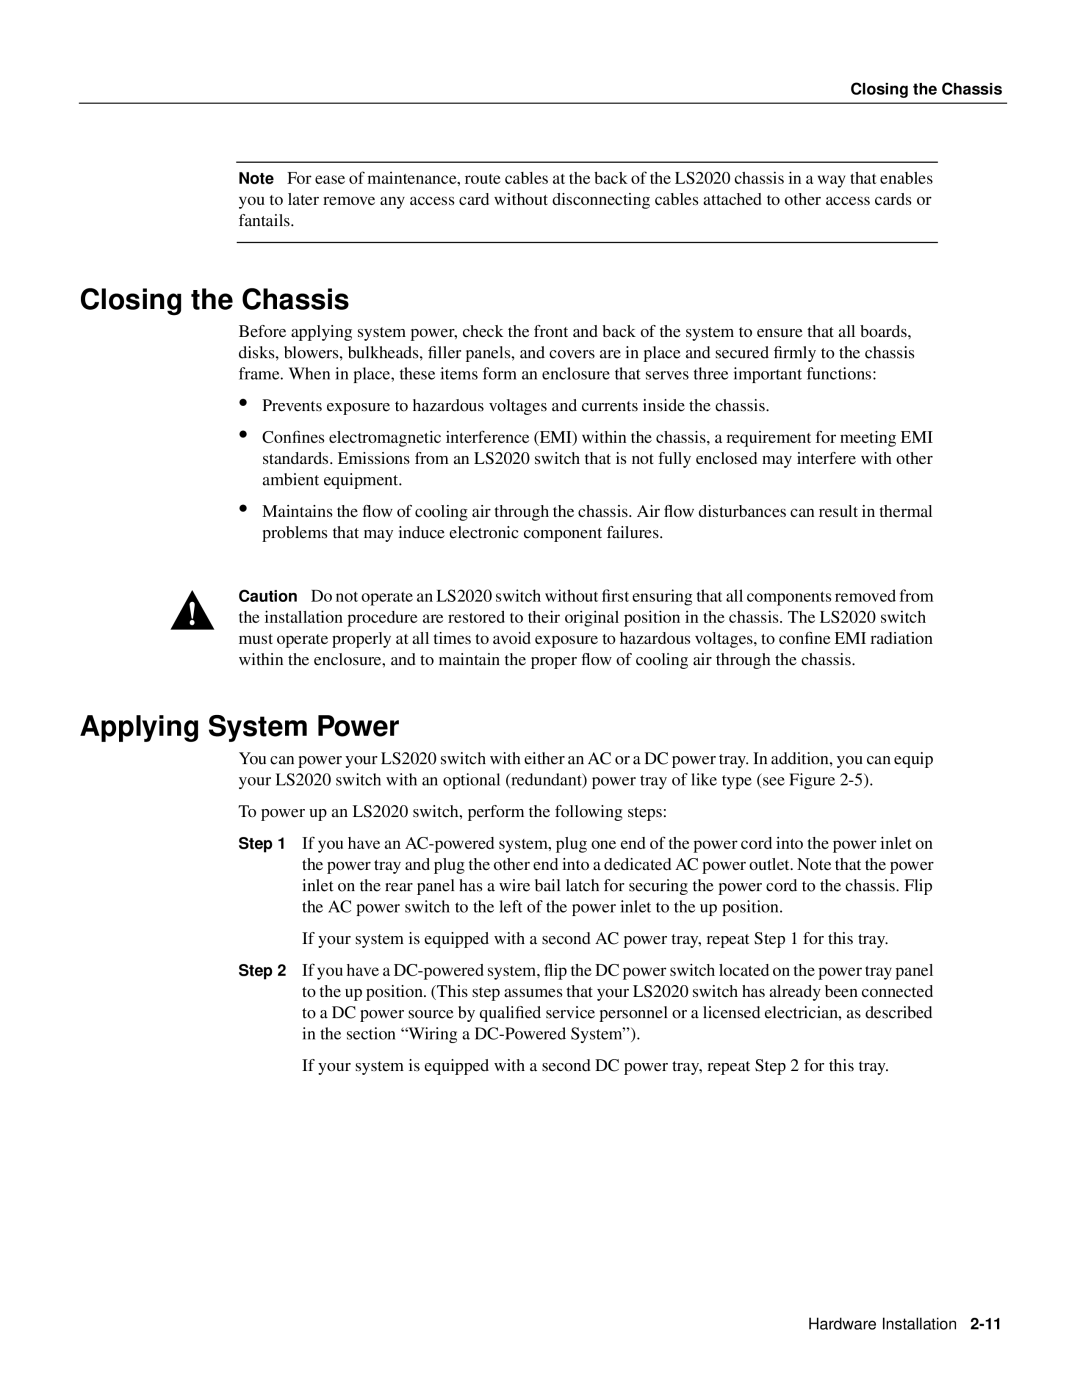 Cisco Systems 2020 manual Closing the Chassis, Applying System Power 